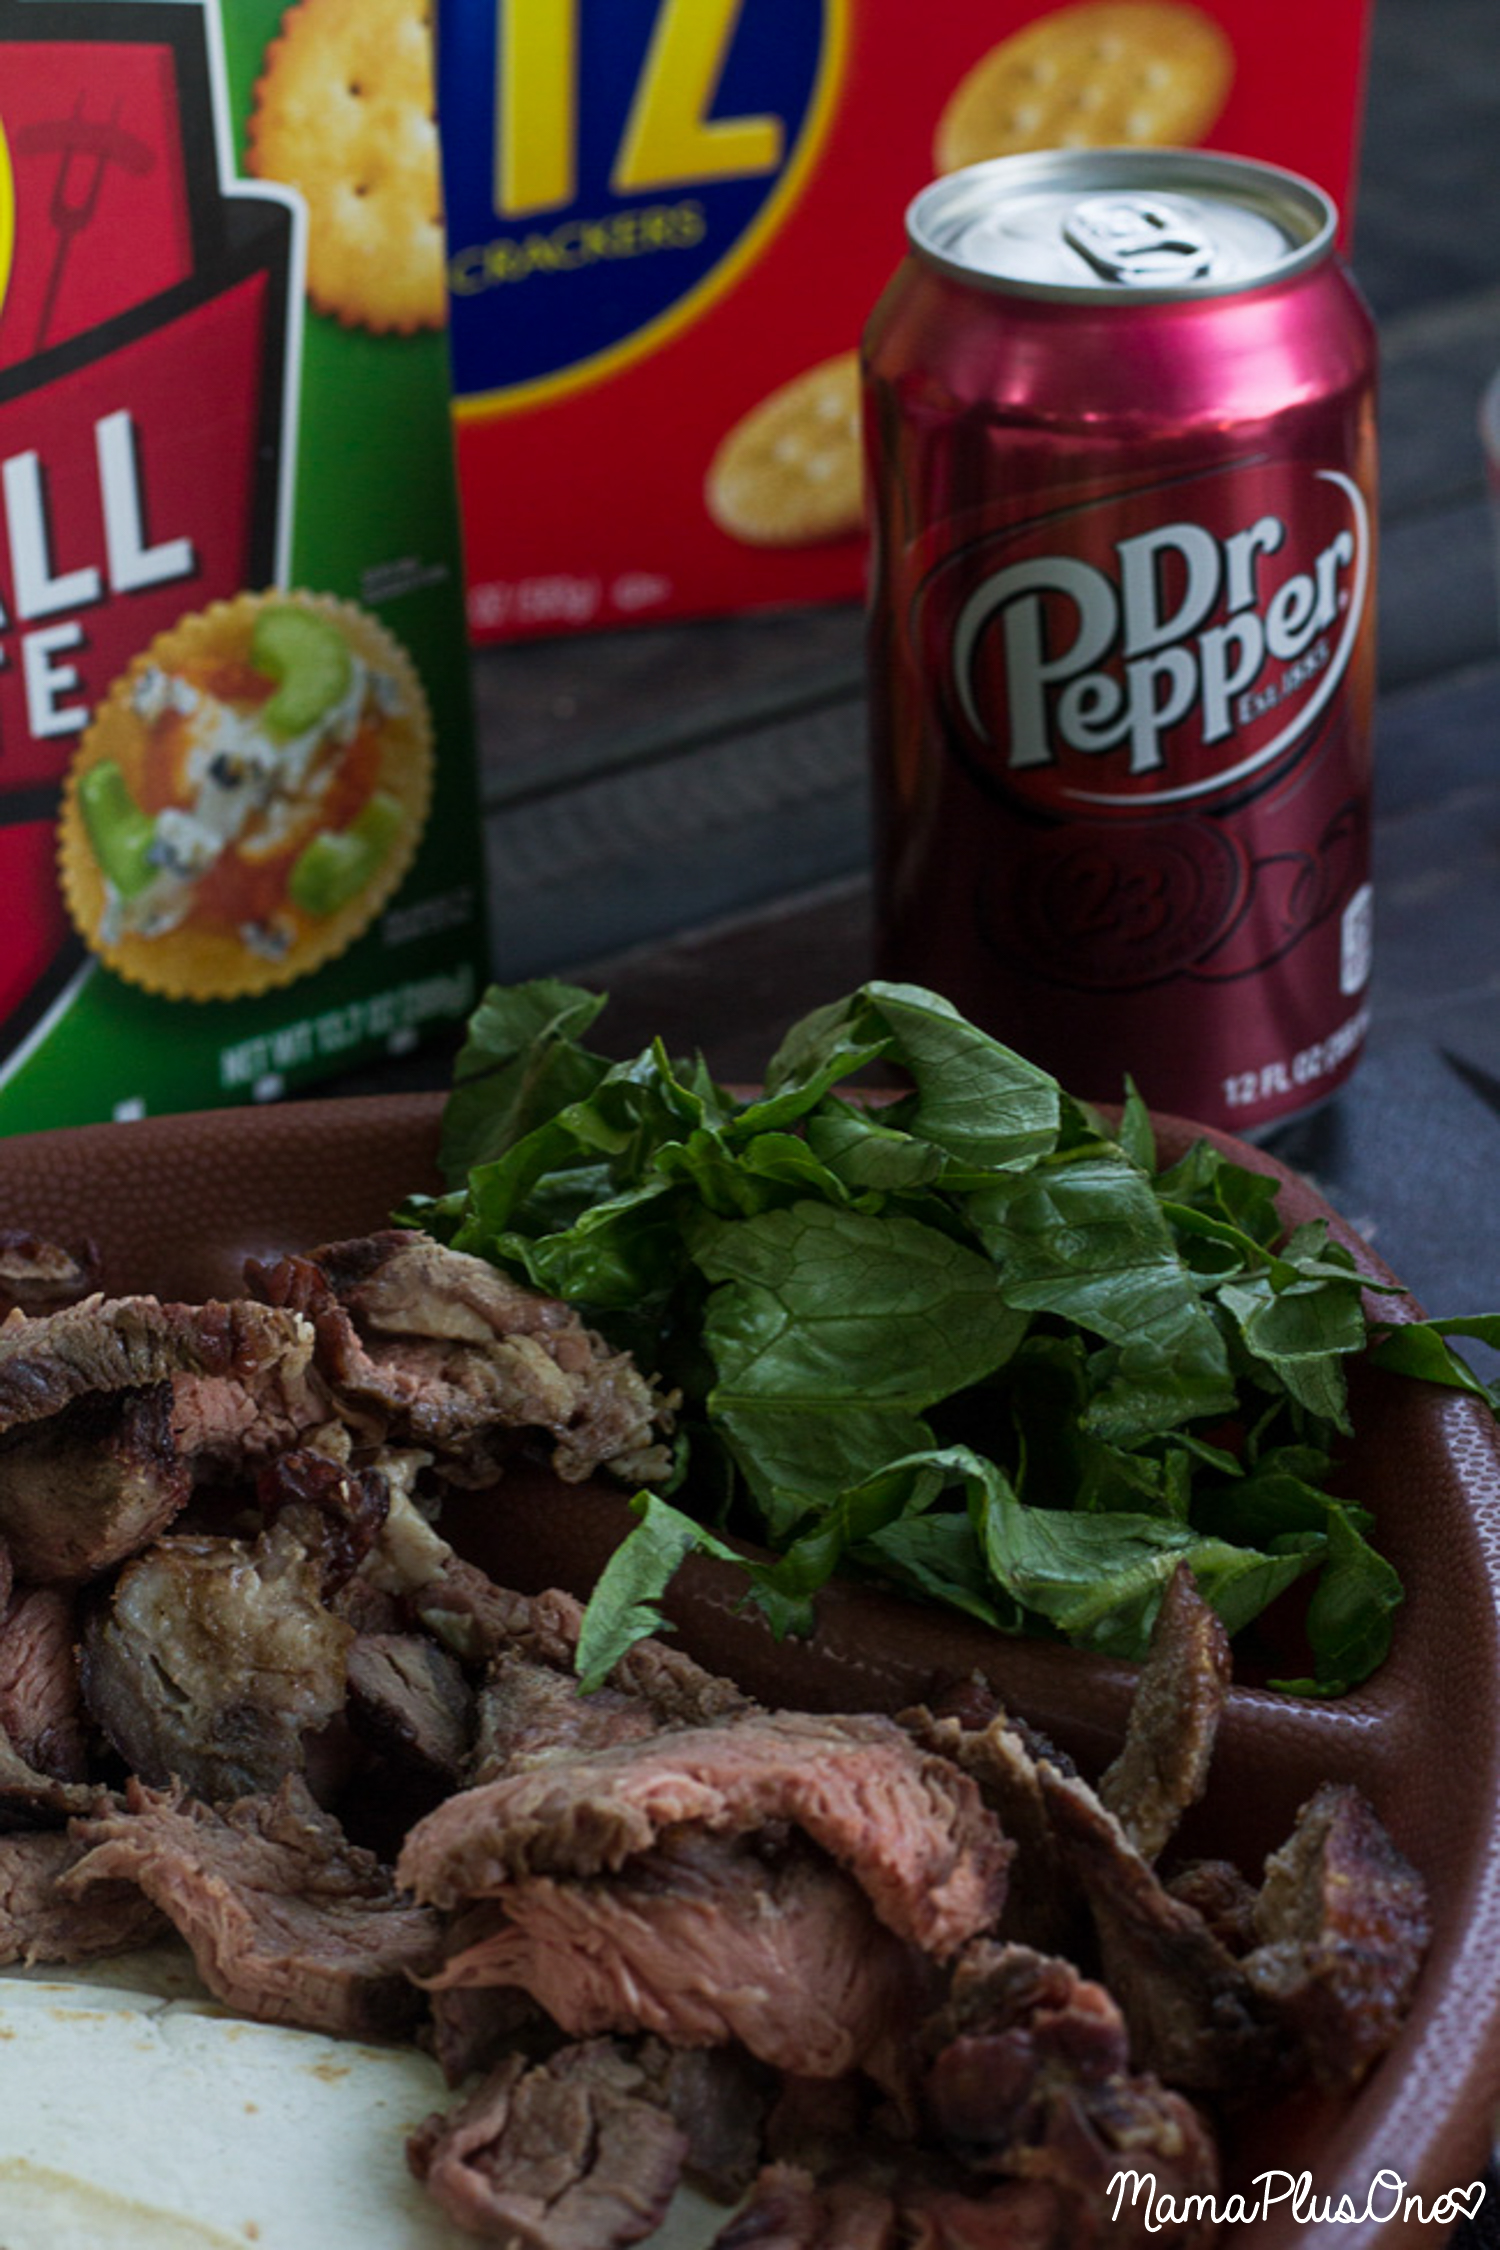 College football season is here which means it's the perfect time for grill-gating, tailgating, and more! This easy Dr Pepper marinated beef and glaze recipe are perfect for game day. Works great on tacos or topping @ritzcrackers! Just marinade, grill, and serve! @coalgrilling #GrillGatingHero #GrillGating